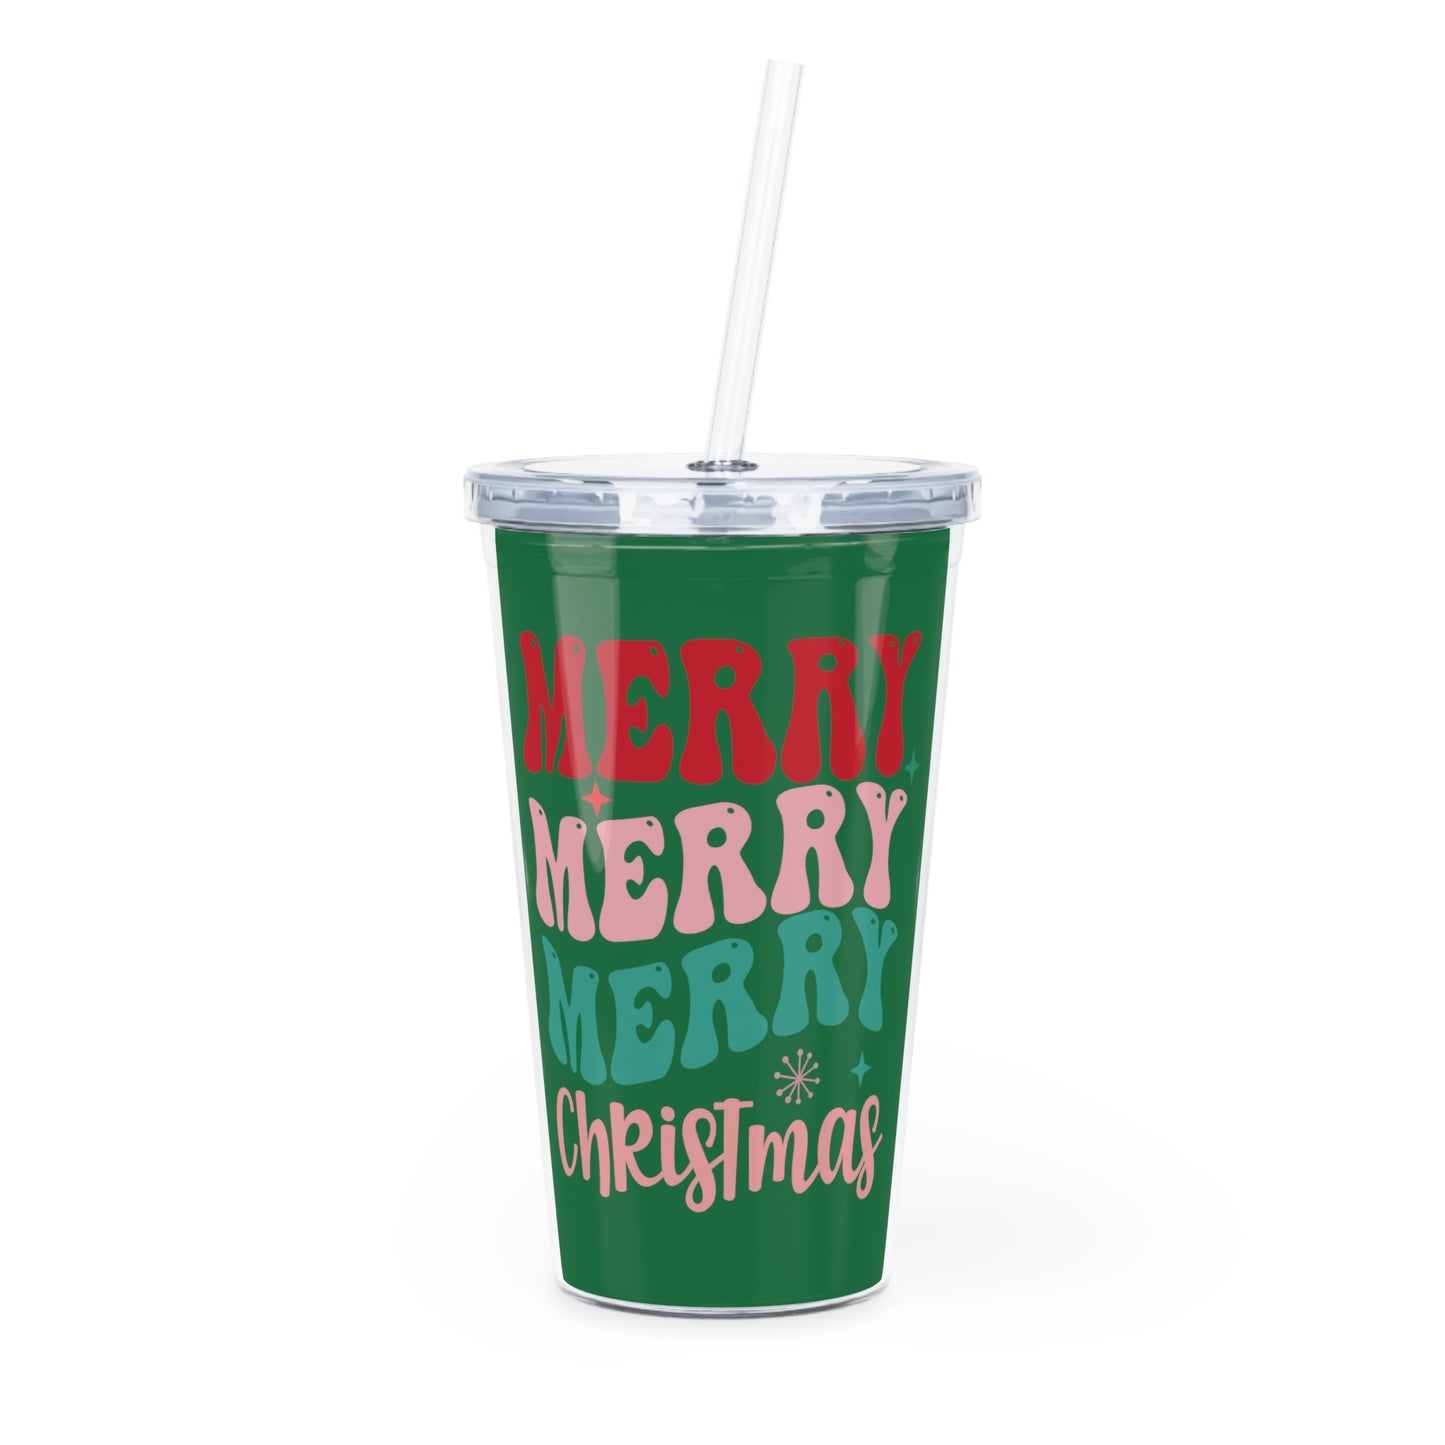 Merry Merry Christmas Plastic Tumbler with Straw